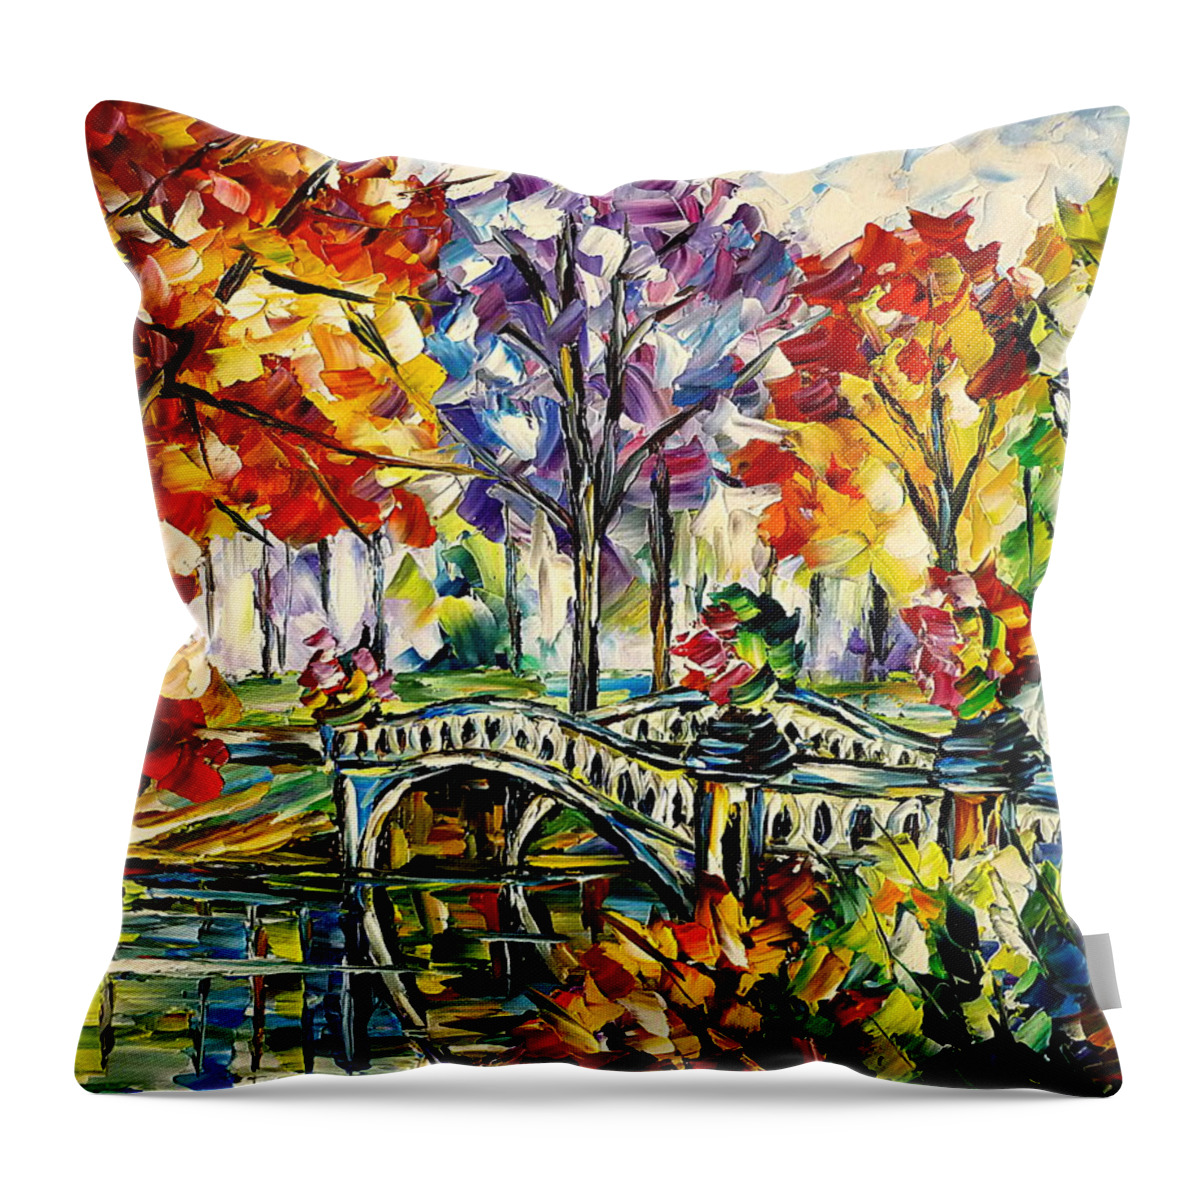 Colorful Cityscape Throw Pillow featuring the painting Central Park, Bow Bridge by Mirek Kuzniar